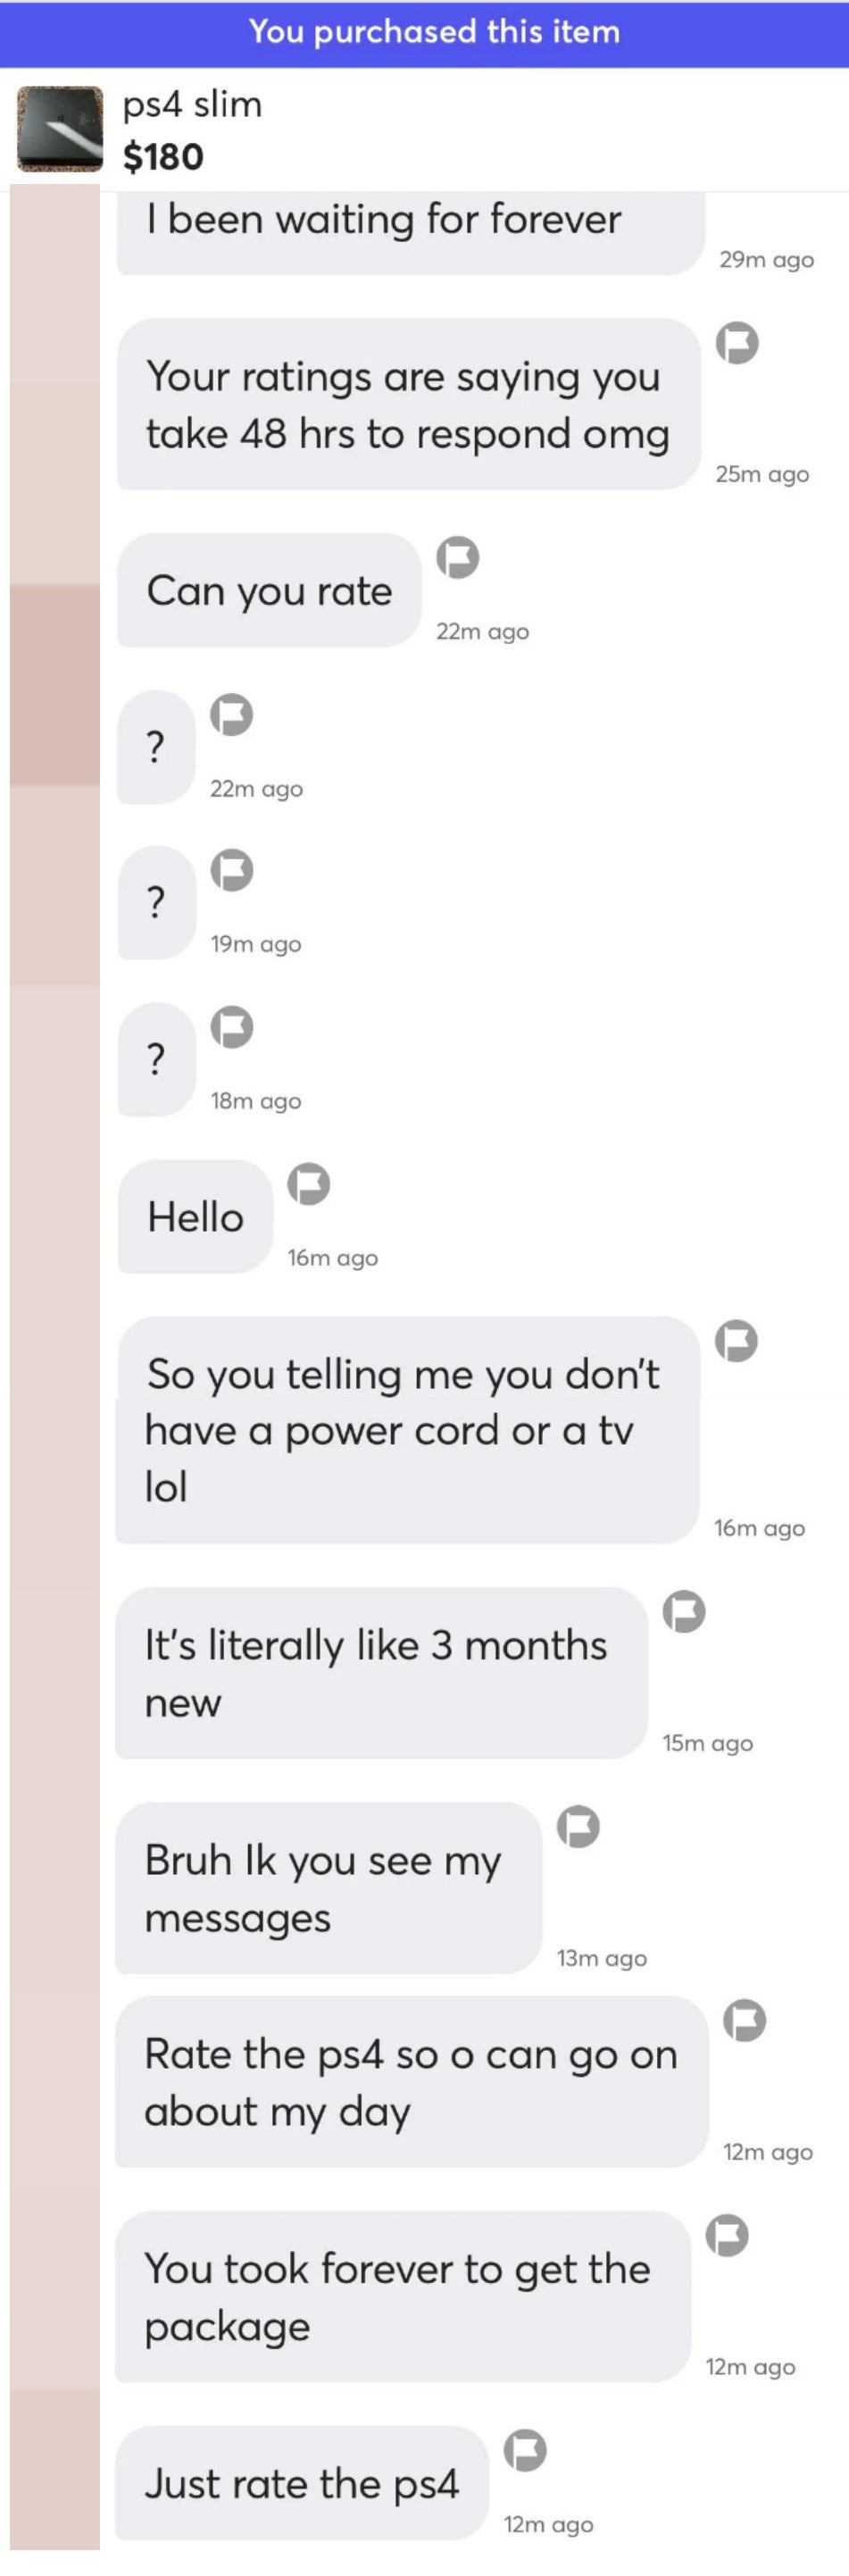 Seller sends a barrage of messages asking buyer to rate, like &quot;Your ratings say you take 48 hrs to respond OMG&quot; and &quot;You took forever to get the package,&quot; without a response